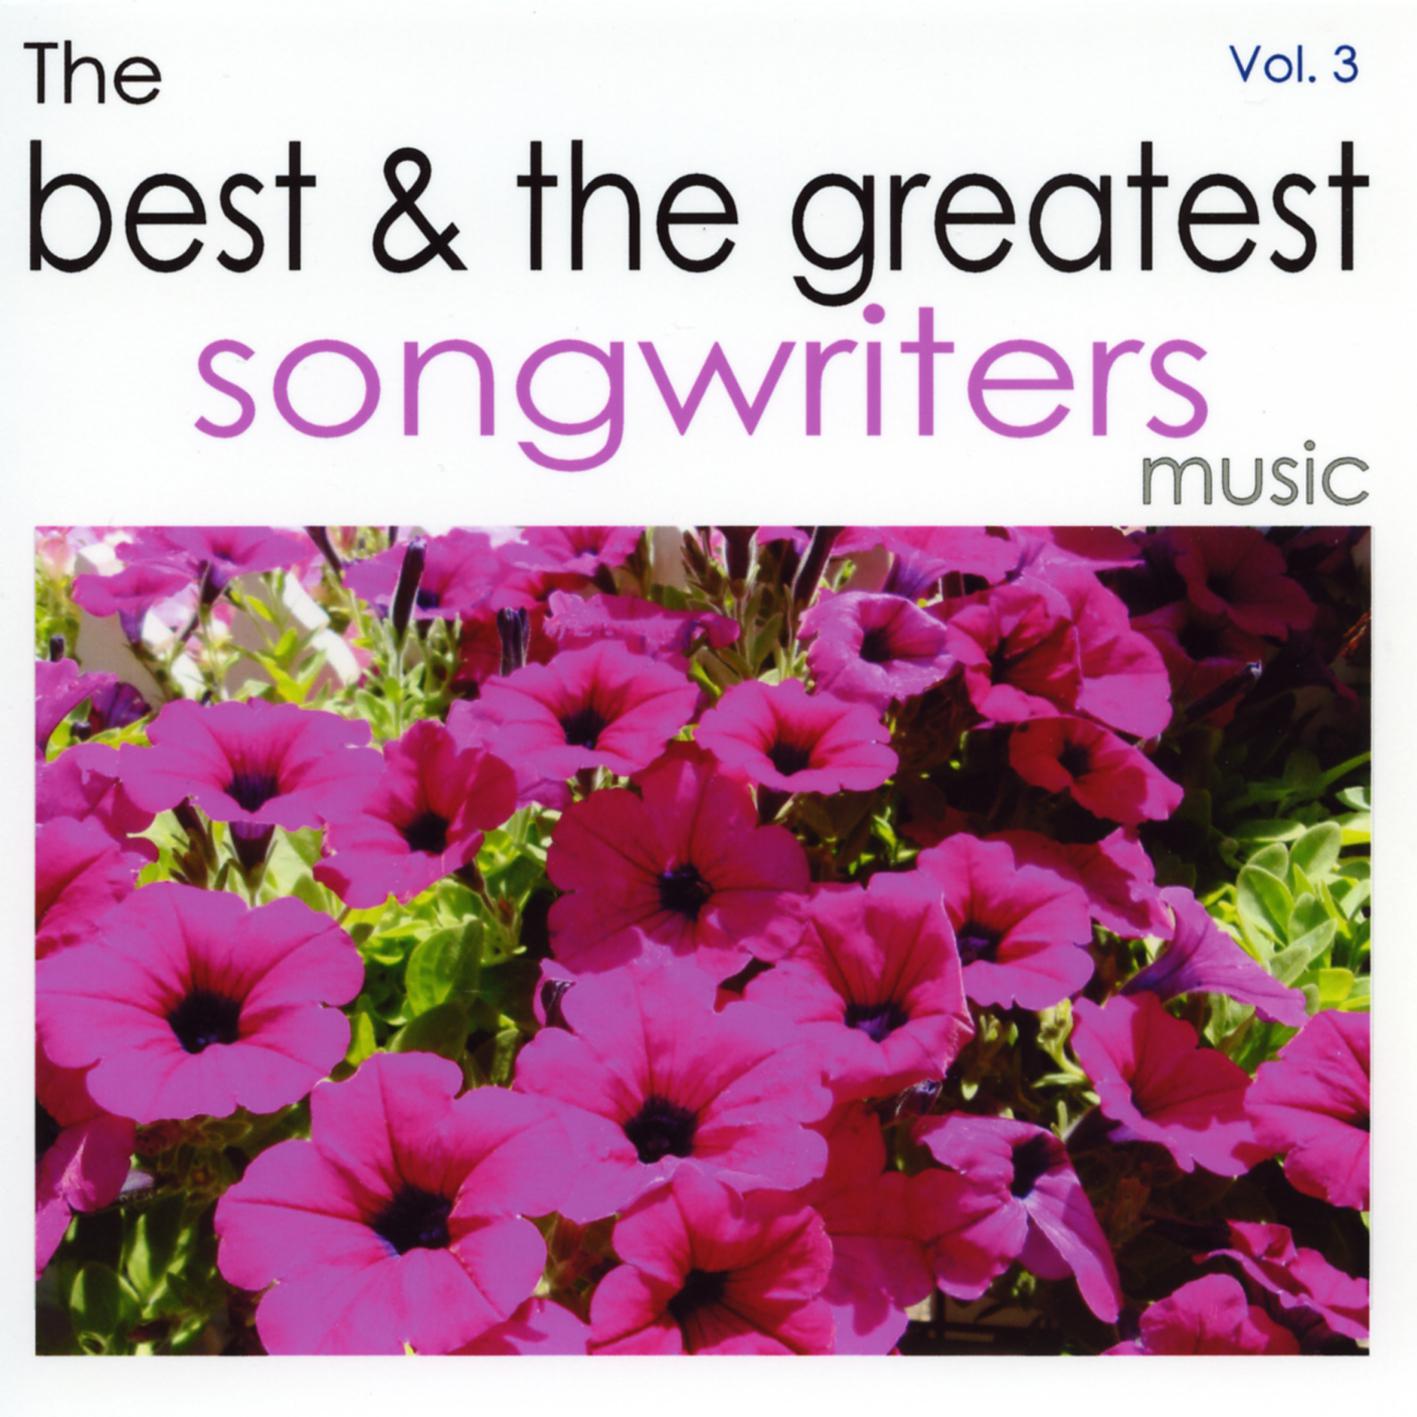 The Best & The Greatest Songwriters Vol.3